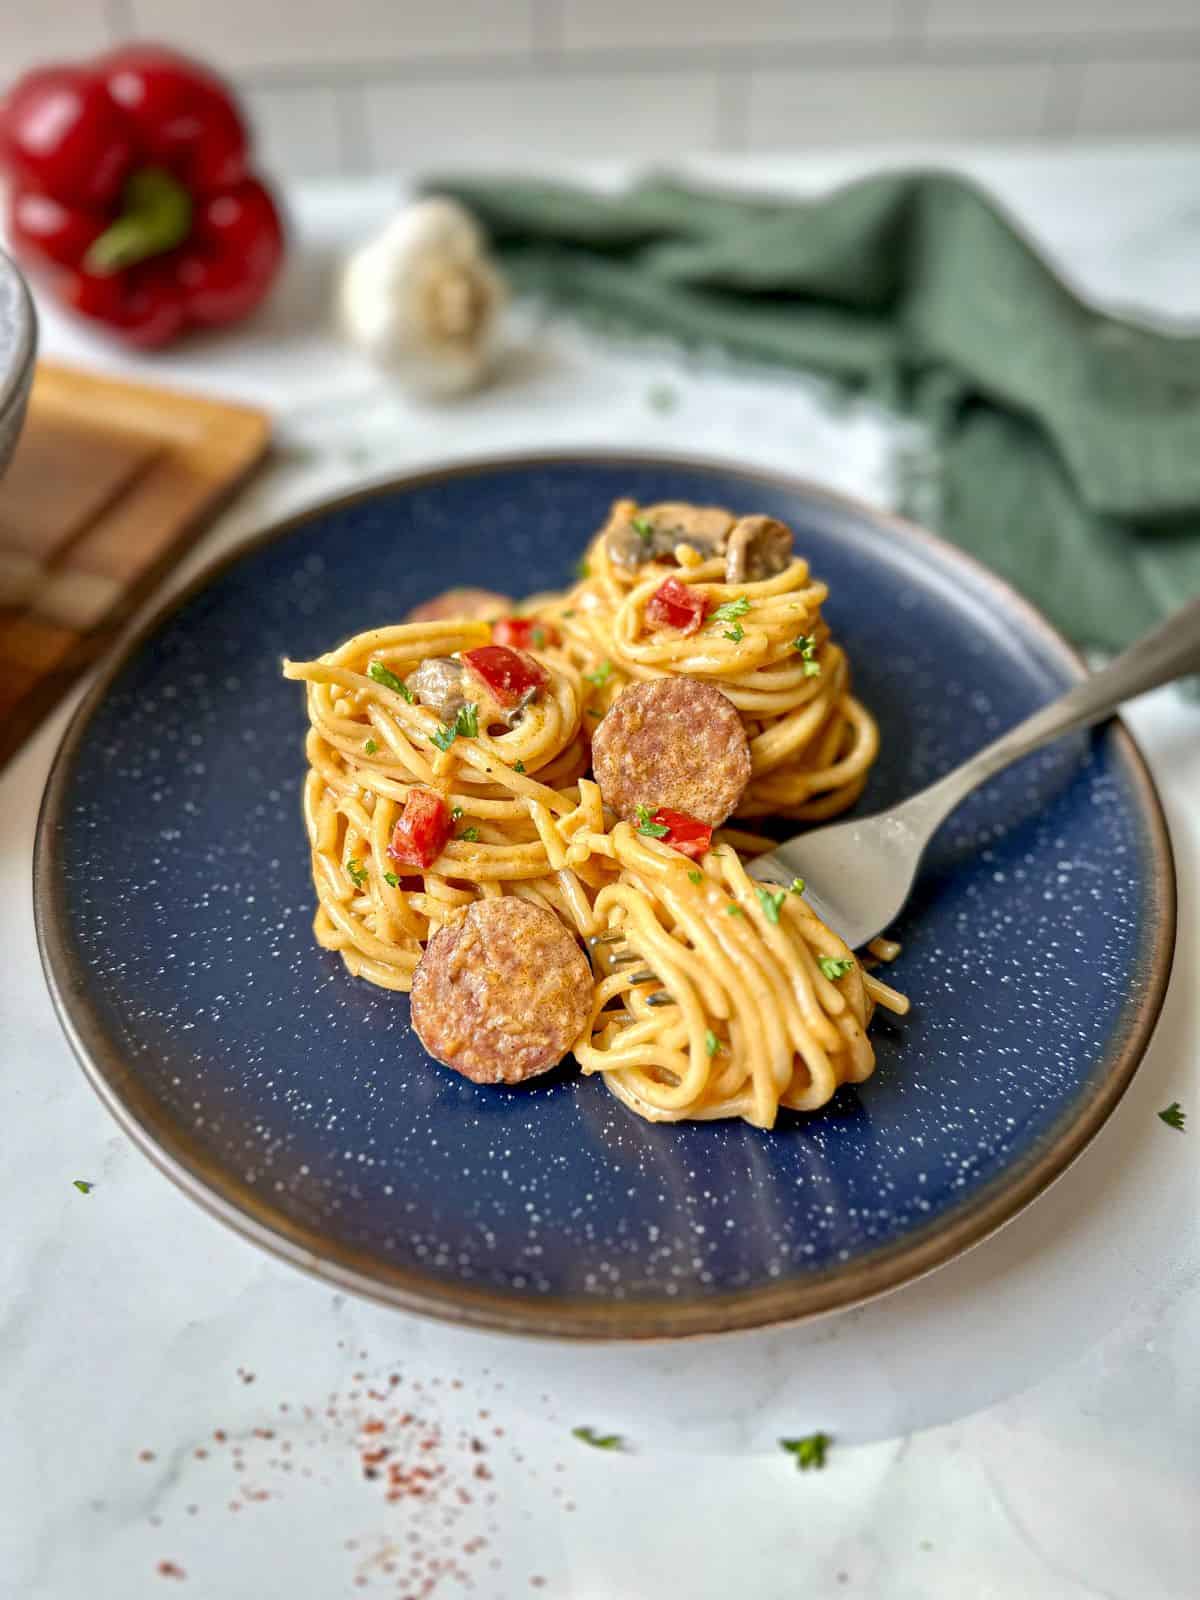 A blue plate with spaghetti, sausage, and peppers. The creamy spaghetti is wrapped around a fork on the plate.